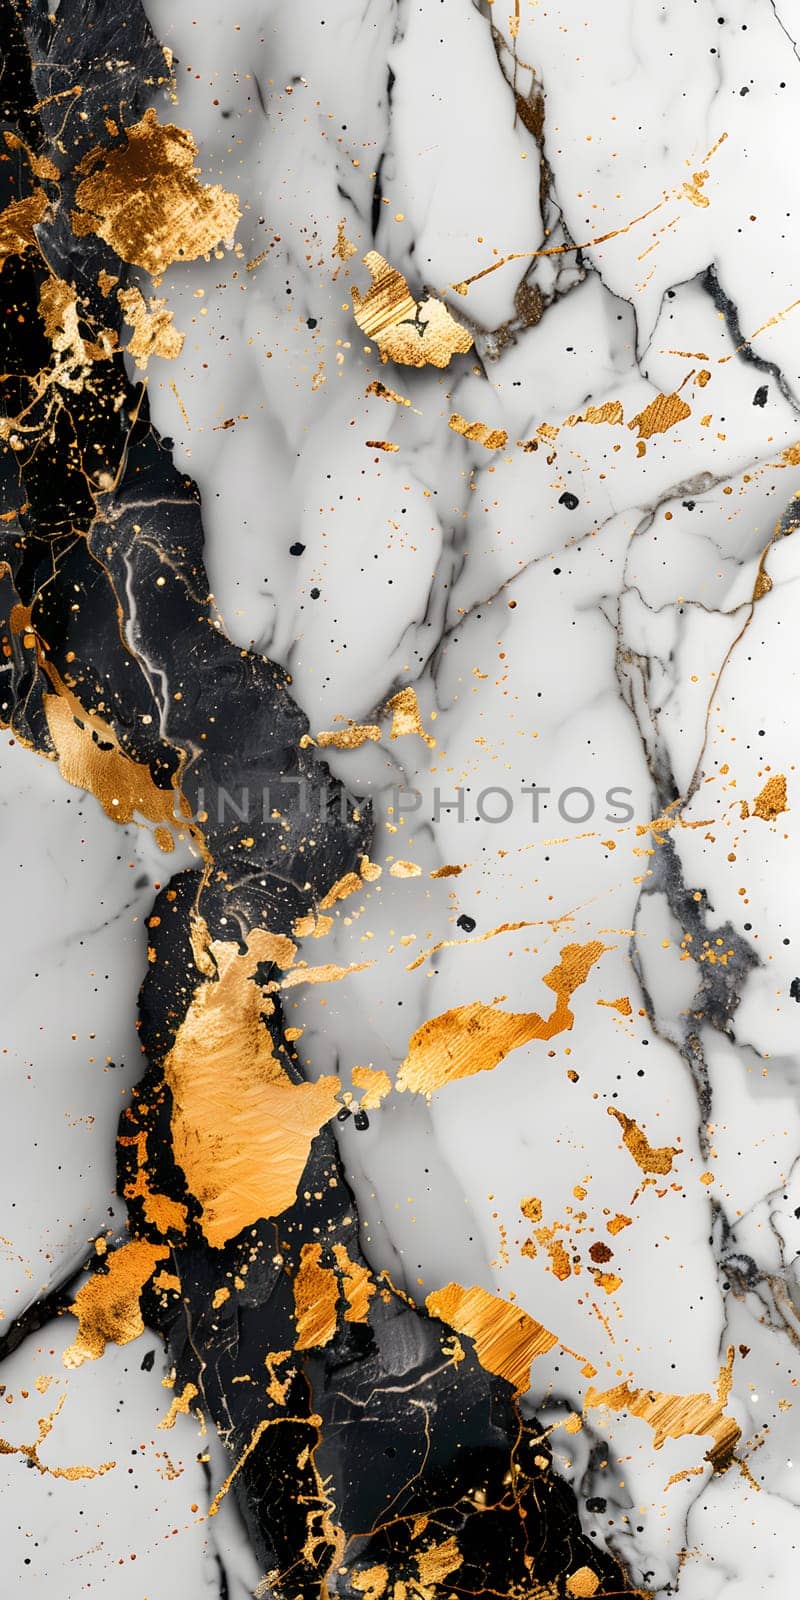 A stunning black and white marble background adorned with elegant gold leaves, resembling a luxurious painting with intricate patterns